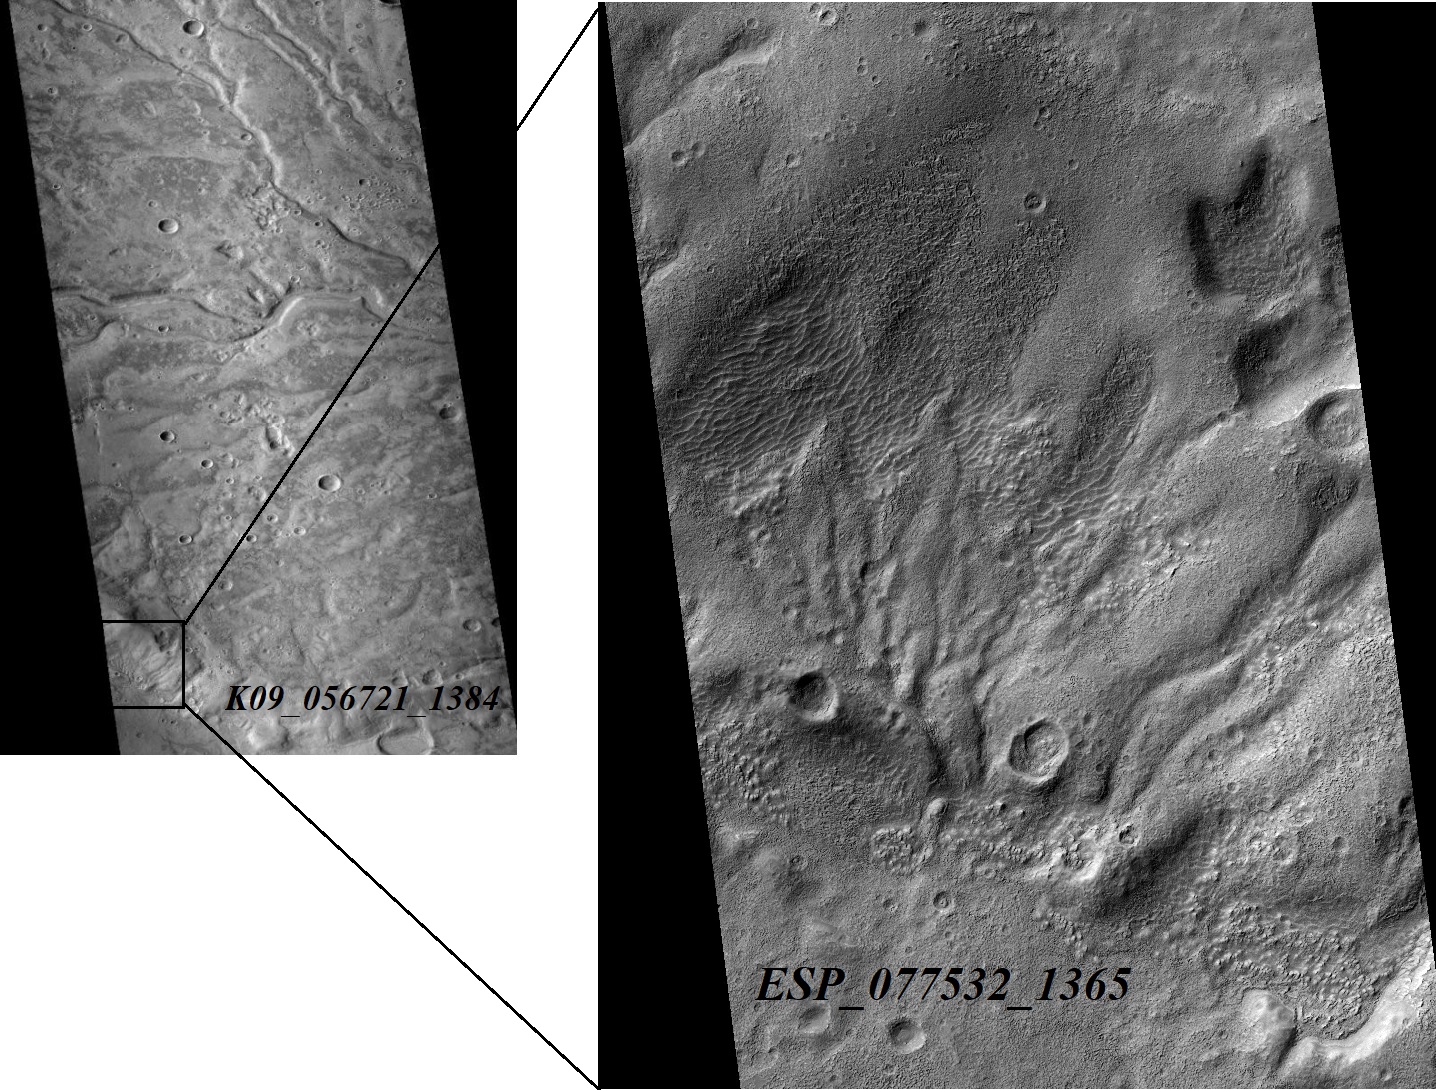 Some channals of Warrego Valles, as seen by CTX and HiRISE